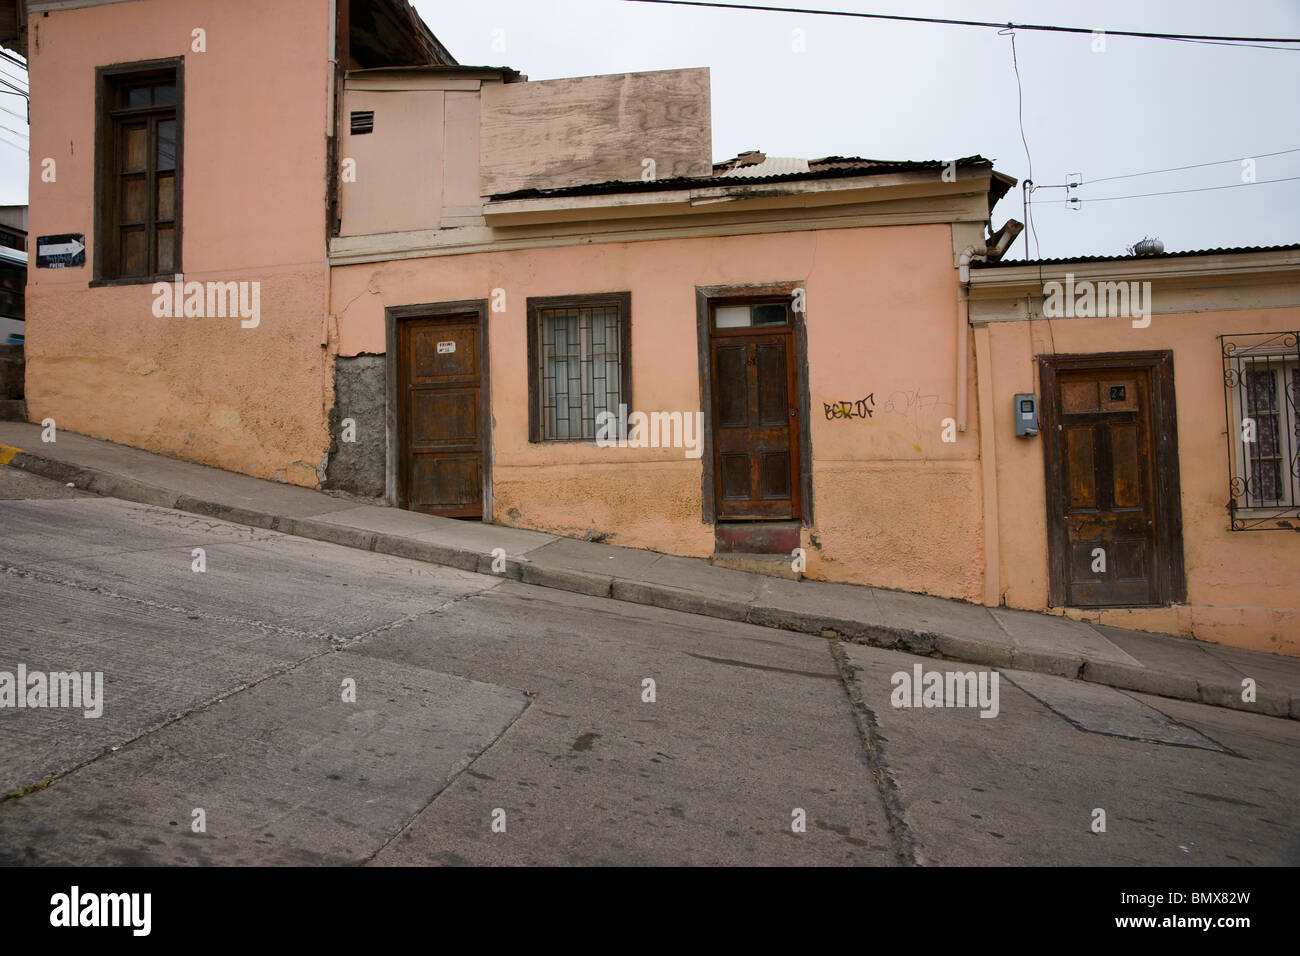 Coquimbo, Chile. Buildings on steep hill. Stock Photo